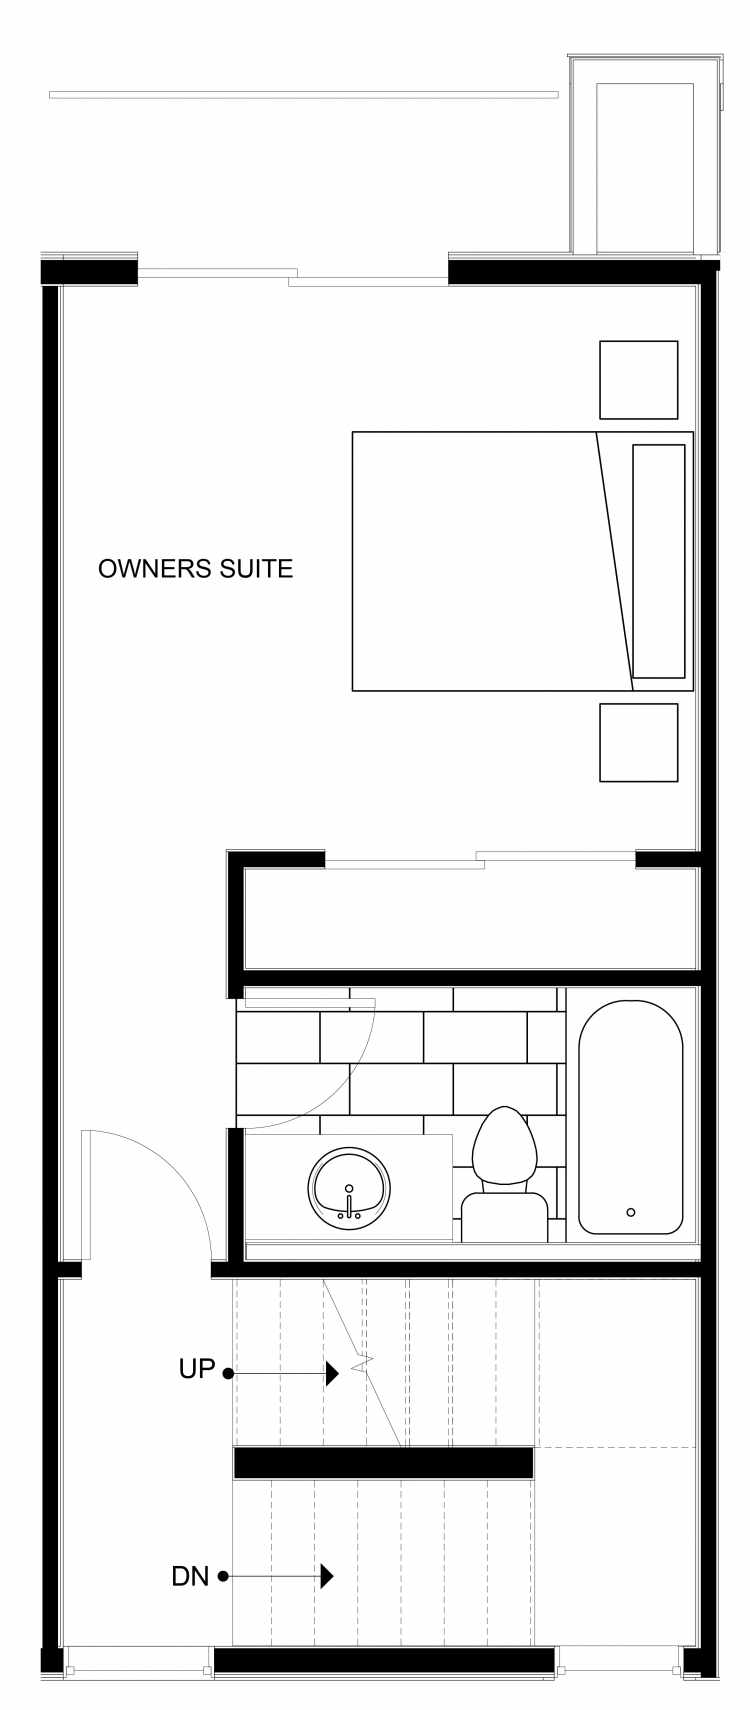 Fourth Floor Plan of 1541 Grandview Pl E, One of the Grandview Townhomes in Capitol Hill